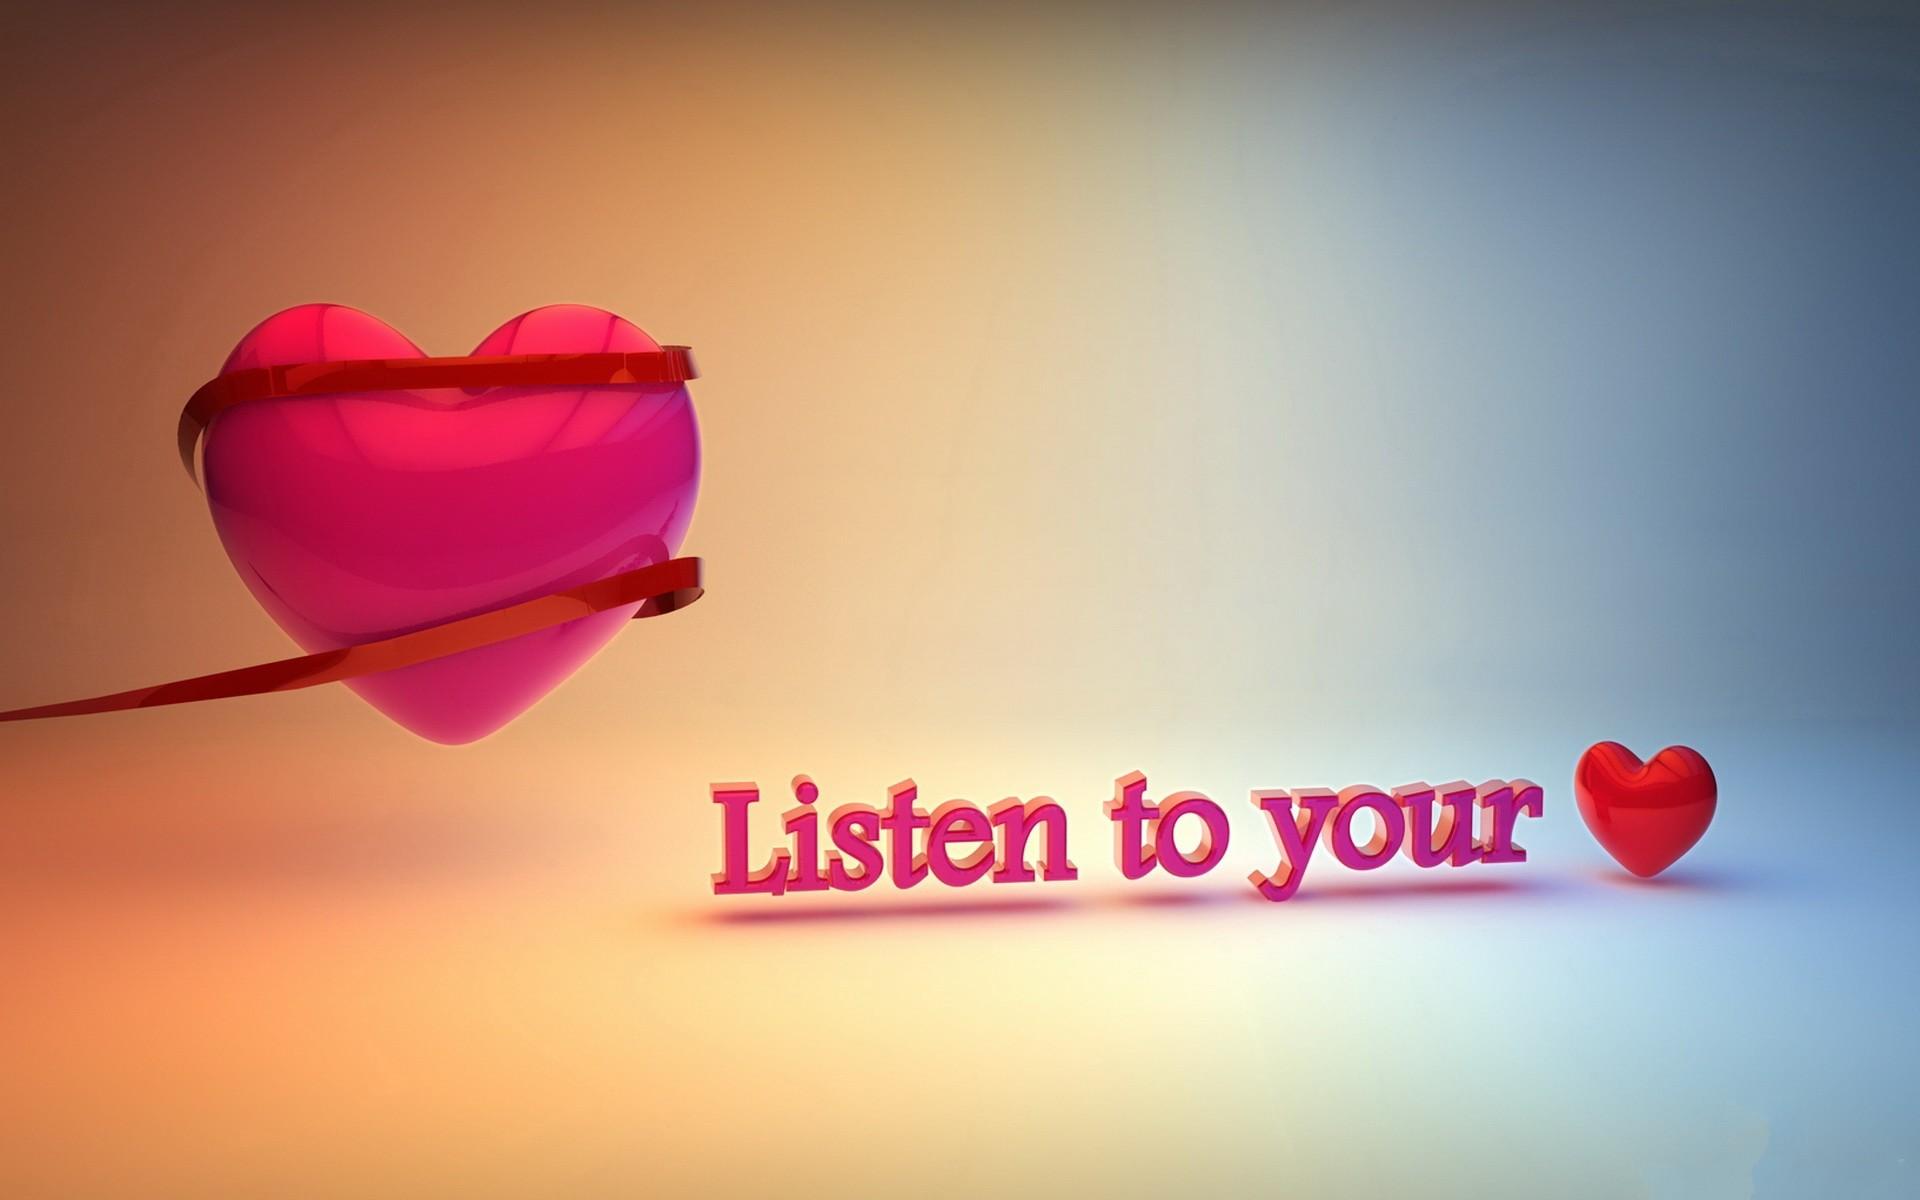 Download the Listen To Your Heart Wallpaper, Listen To Your Heart